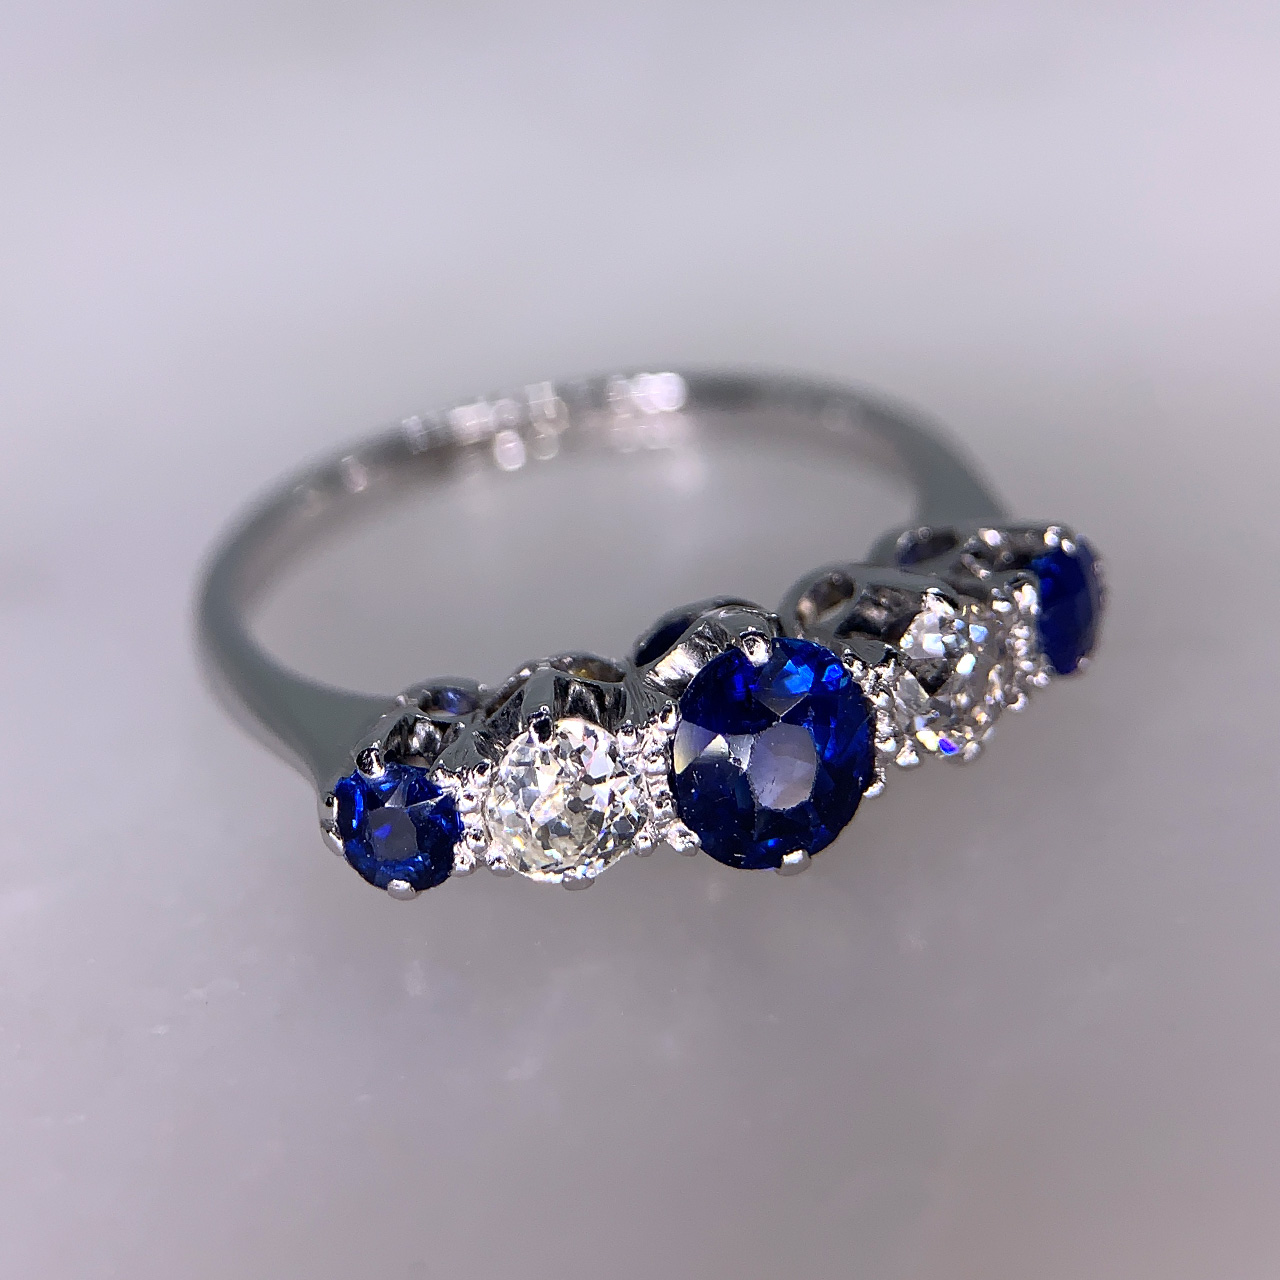 Edwardian Sapphire and Diamond Half Hoop in hallmarked Platinum and 18ct White Gold. This is an exquisite multi-tone Sapphire and brilliant cut Diamond 5 stone half hoop,  all stones are claw set. The head of the ring is approximately 8.5mm x 6mm and sits within a smooth shank in the most perfect condition.